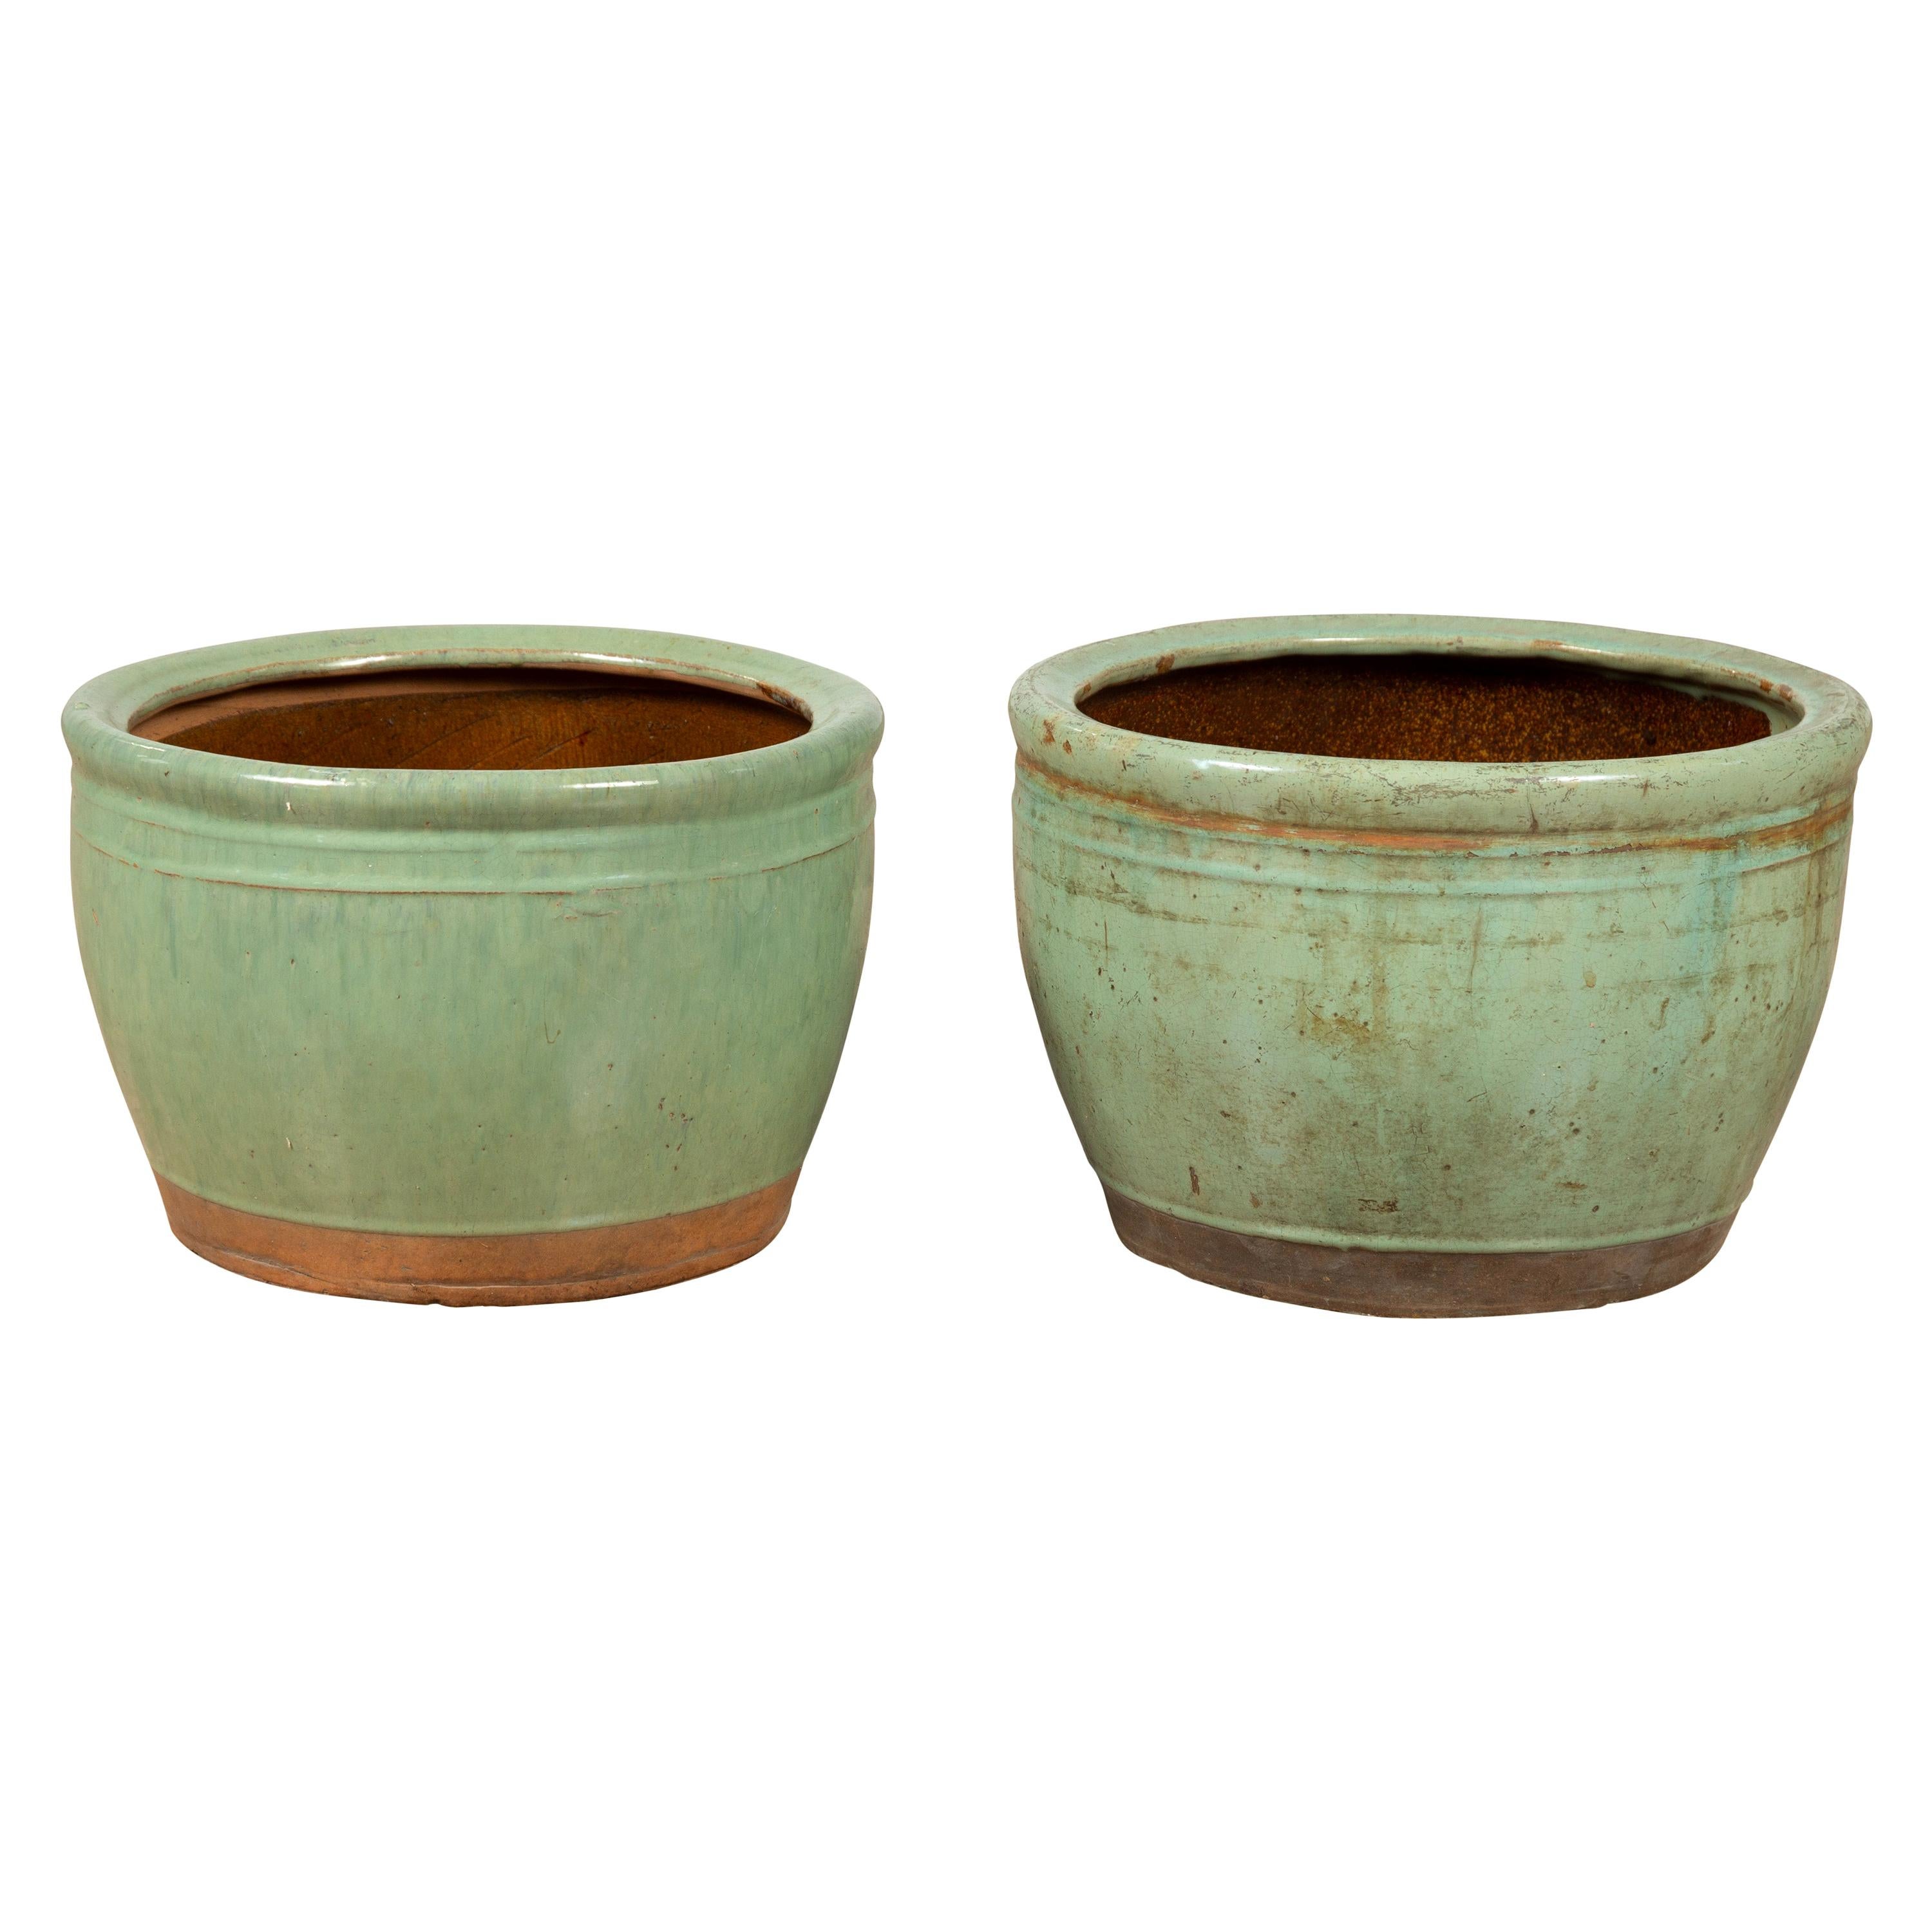 Near Pair of Large Vintage Chinese Green Glazed Ceramic Round Planters